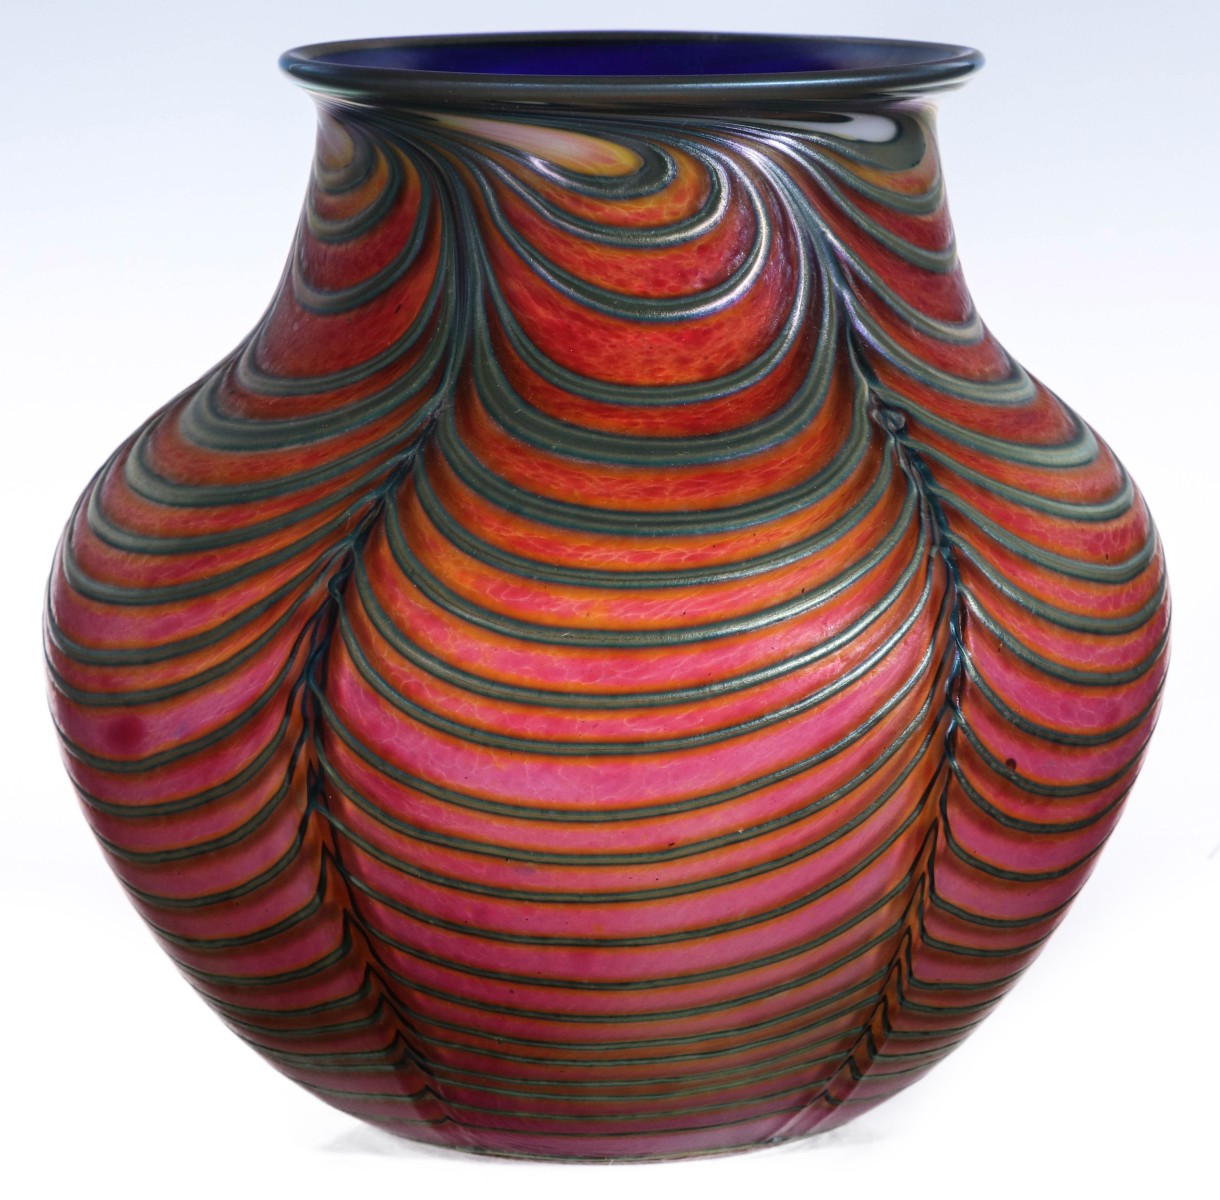 A FINE AND RARE DANIEL LOTTON VASE WITH THICK THREADING